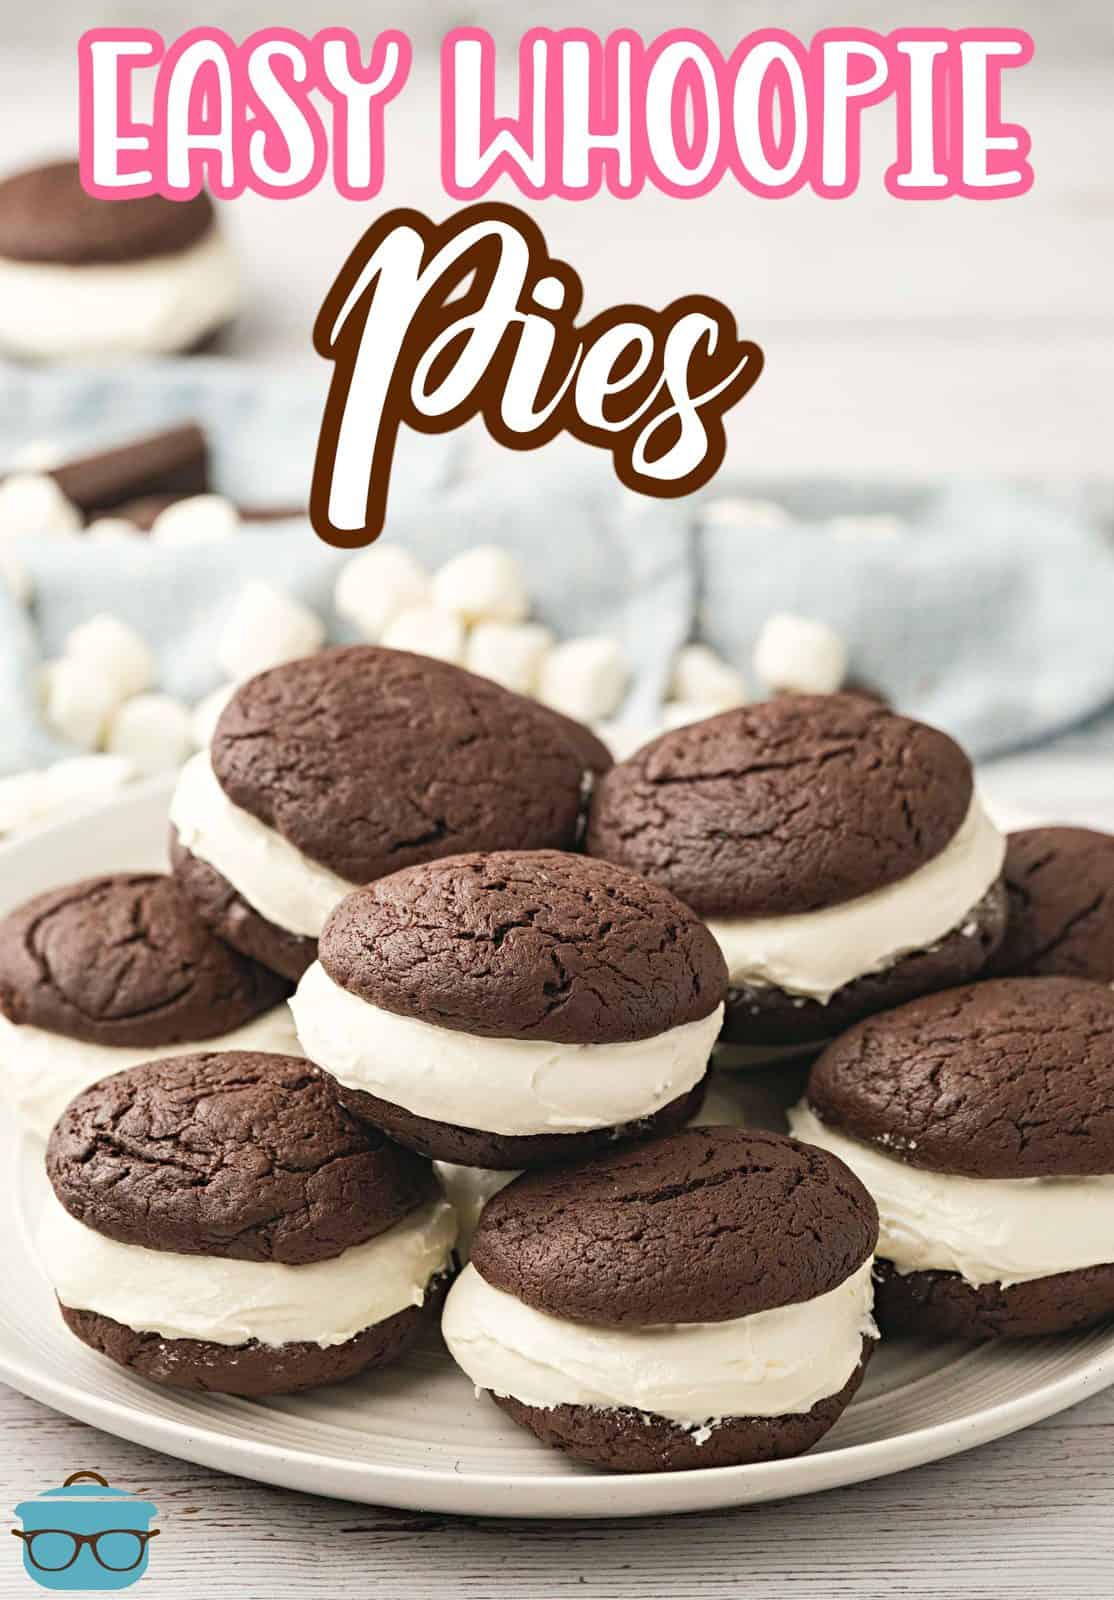 A stack of chocolate whoopie pies shown on a round white plate. 